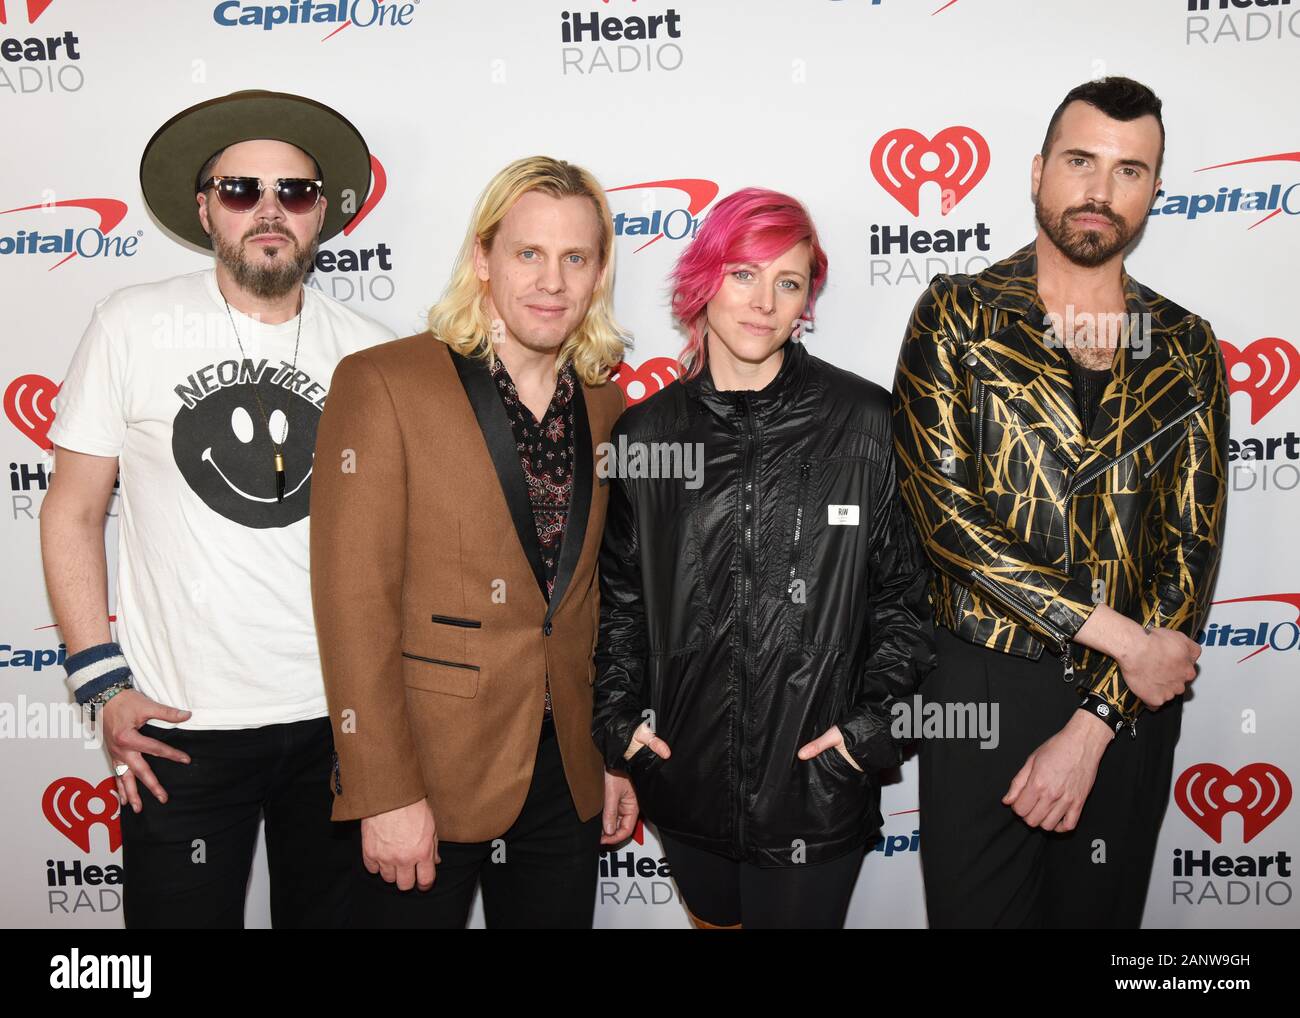 18 January 2020 - Hollywood, California - Branden Campbell, Chris Allen, Elaine Bradley Tyler Glenn, Neon Trees. iHeartRadio ALTer EGO 2020 Presented by Capital One held at The Forum. Photo Credit: Billy Bennight/AdMedia /MediaPunch Stock Photo